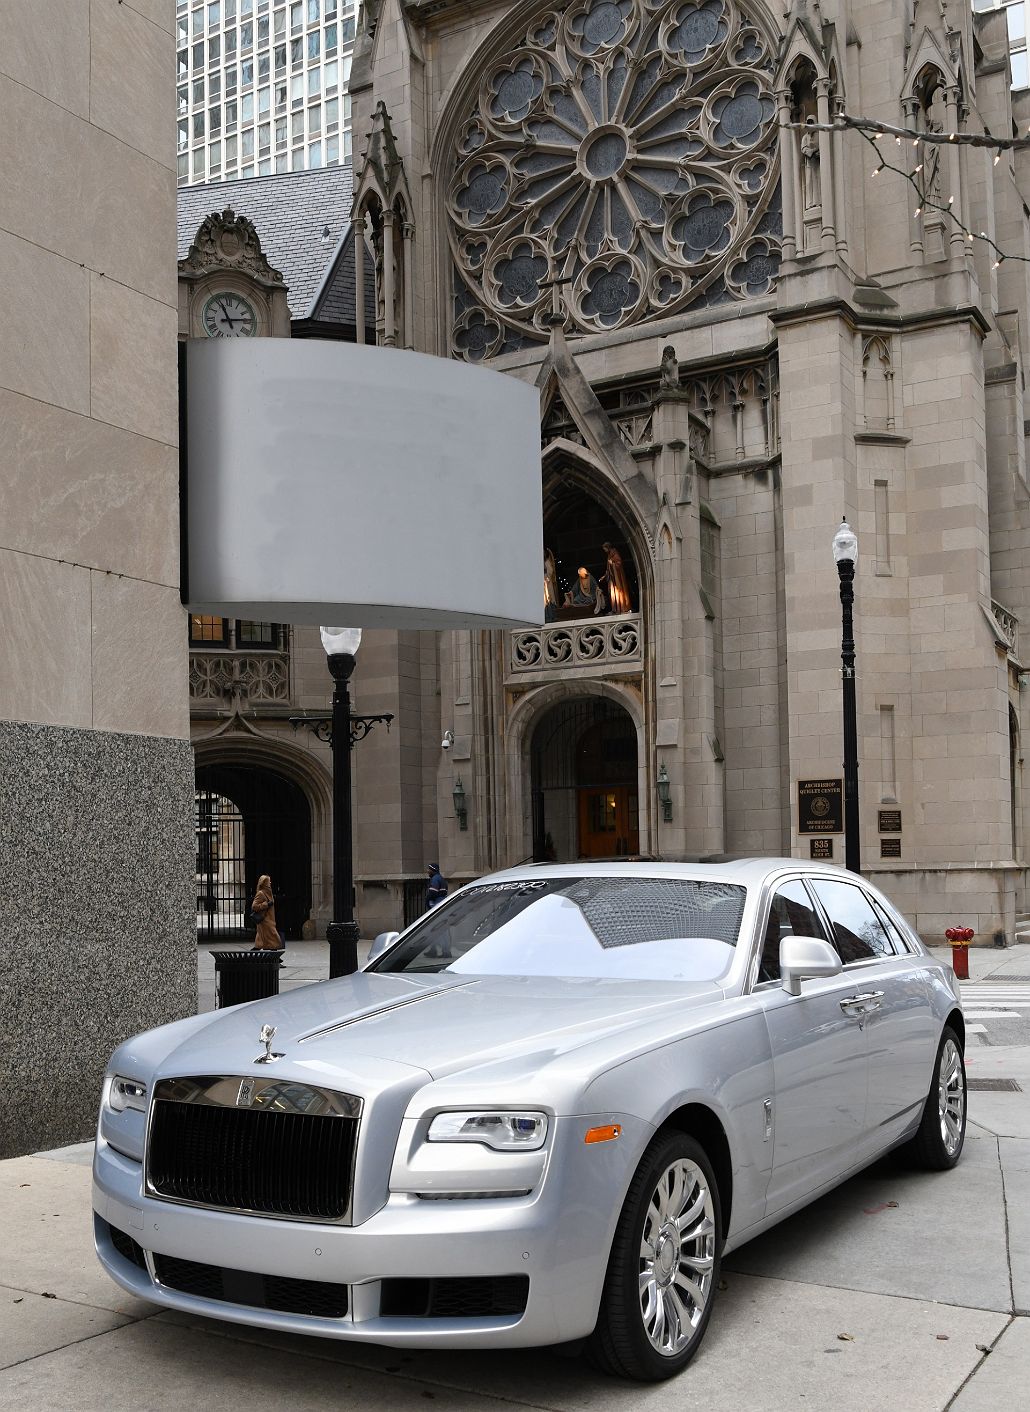 2019 Rolls-Royce Ghost null image 0